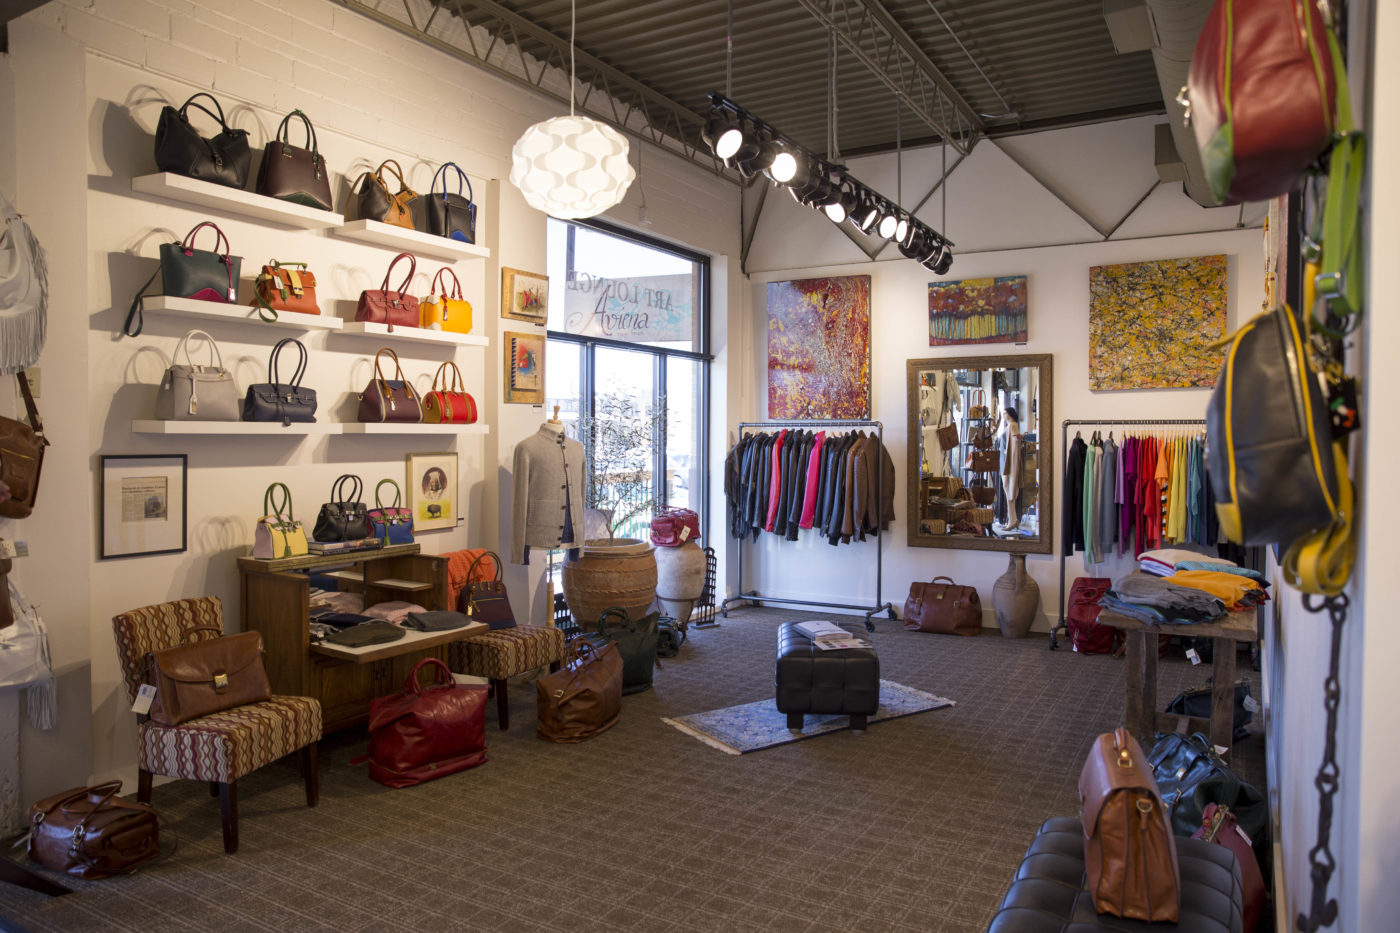 Luca's Boutique at 8th & Railroad